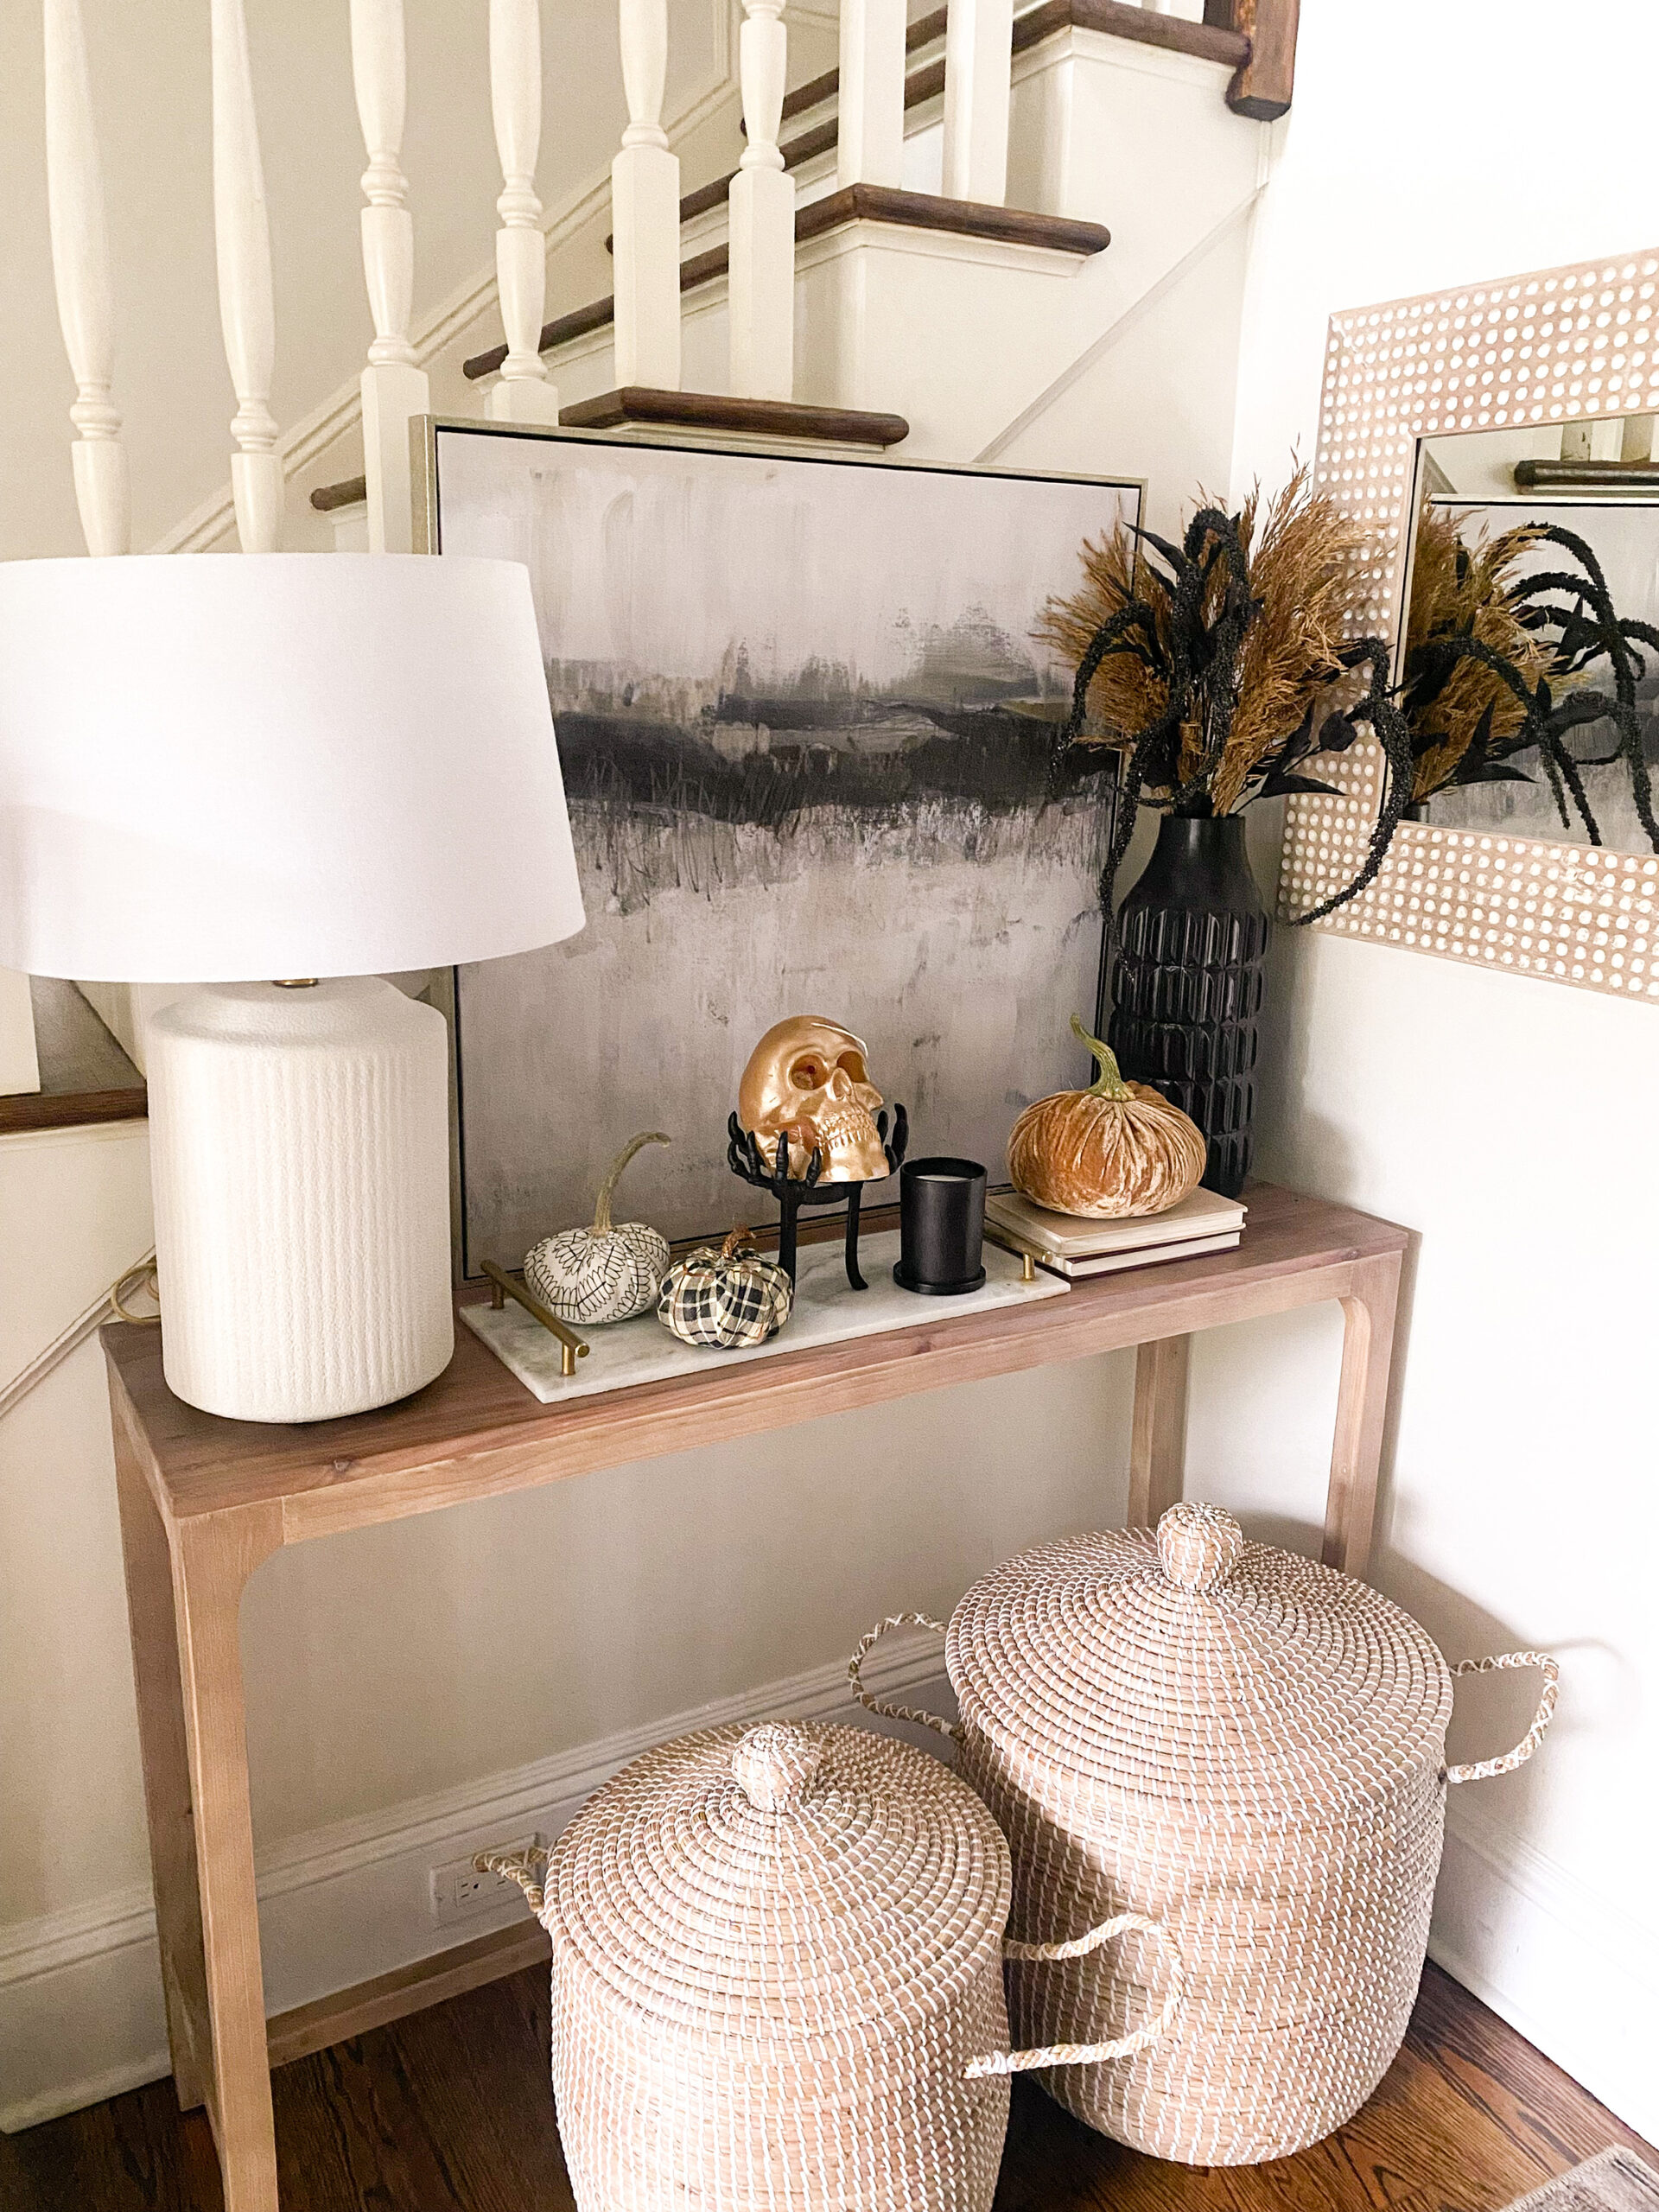 Add a Few Decorative Items to Take Your Fall to Halloween. Suggesting some easy transitional items taking it from Fall to Halloween Console Table || Darling Darleen Top CT LIFESTYLE BLOGGER